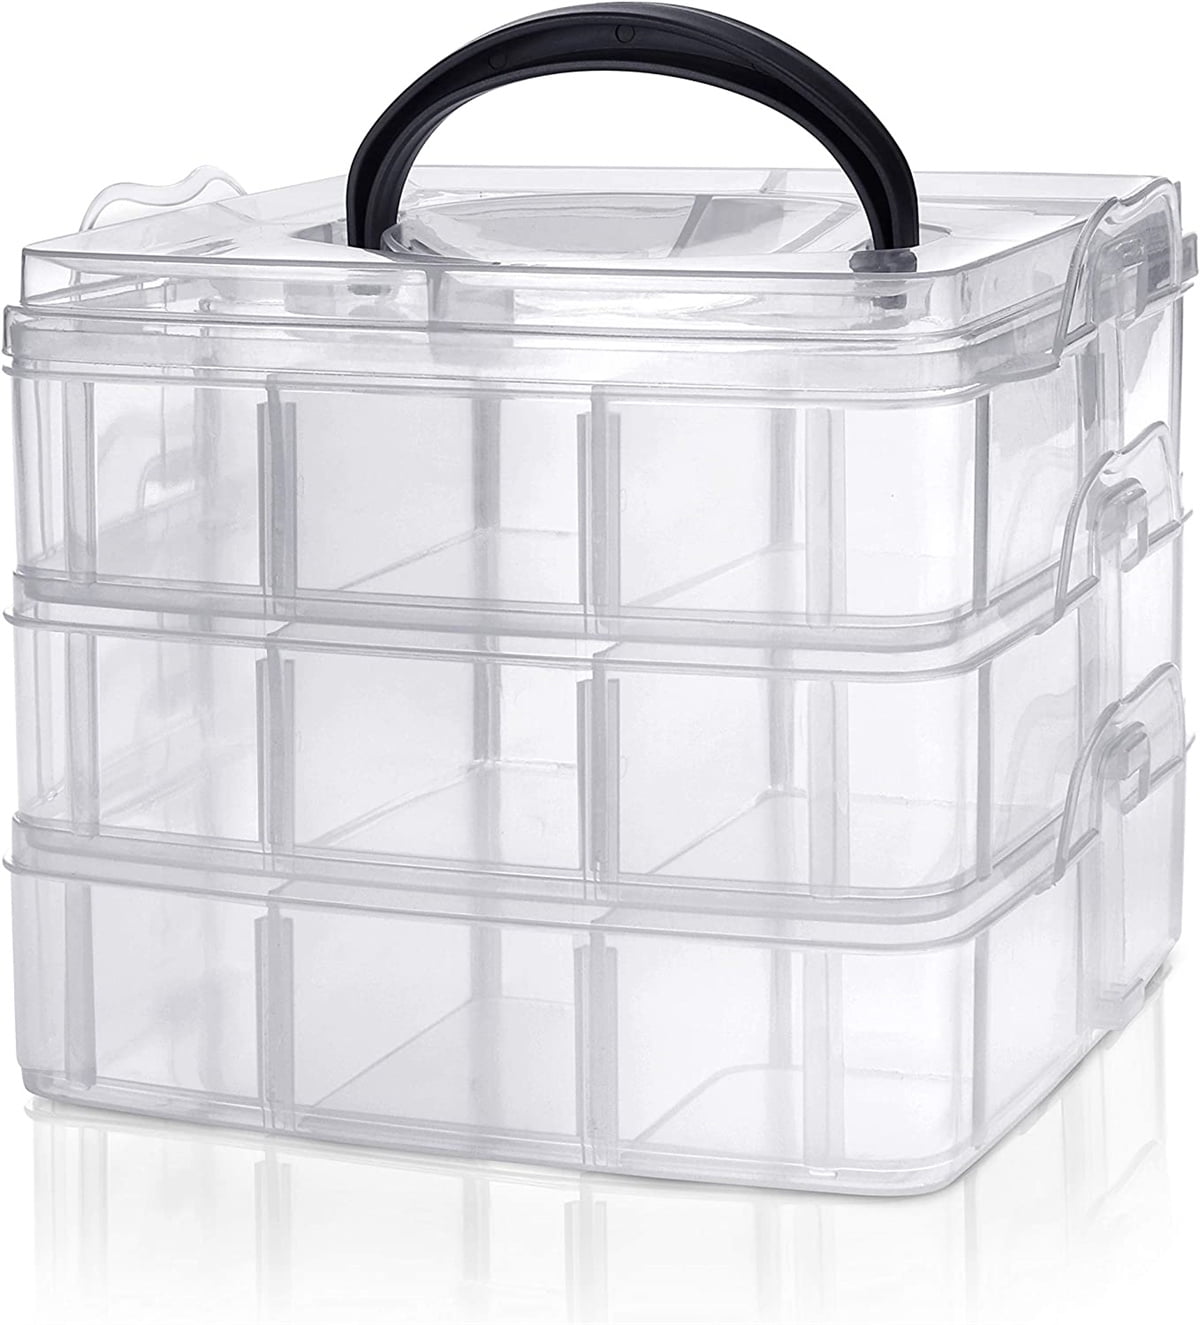 Ortodayes 3 Quart Plastic Storage Bins, Pack of 6 Small Boxes with Lids